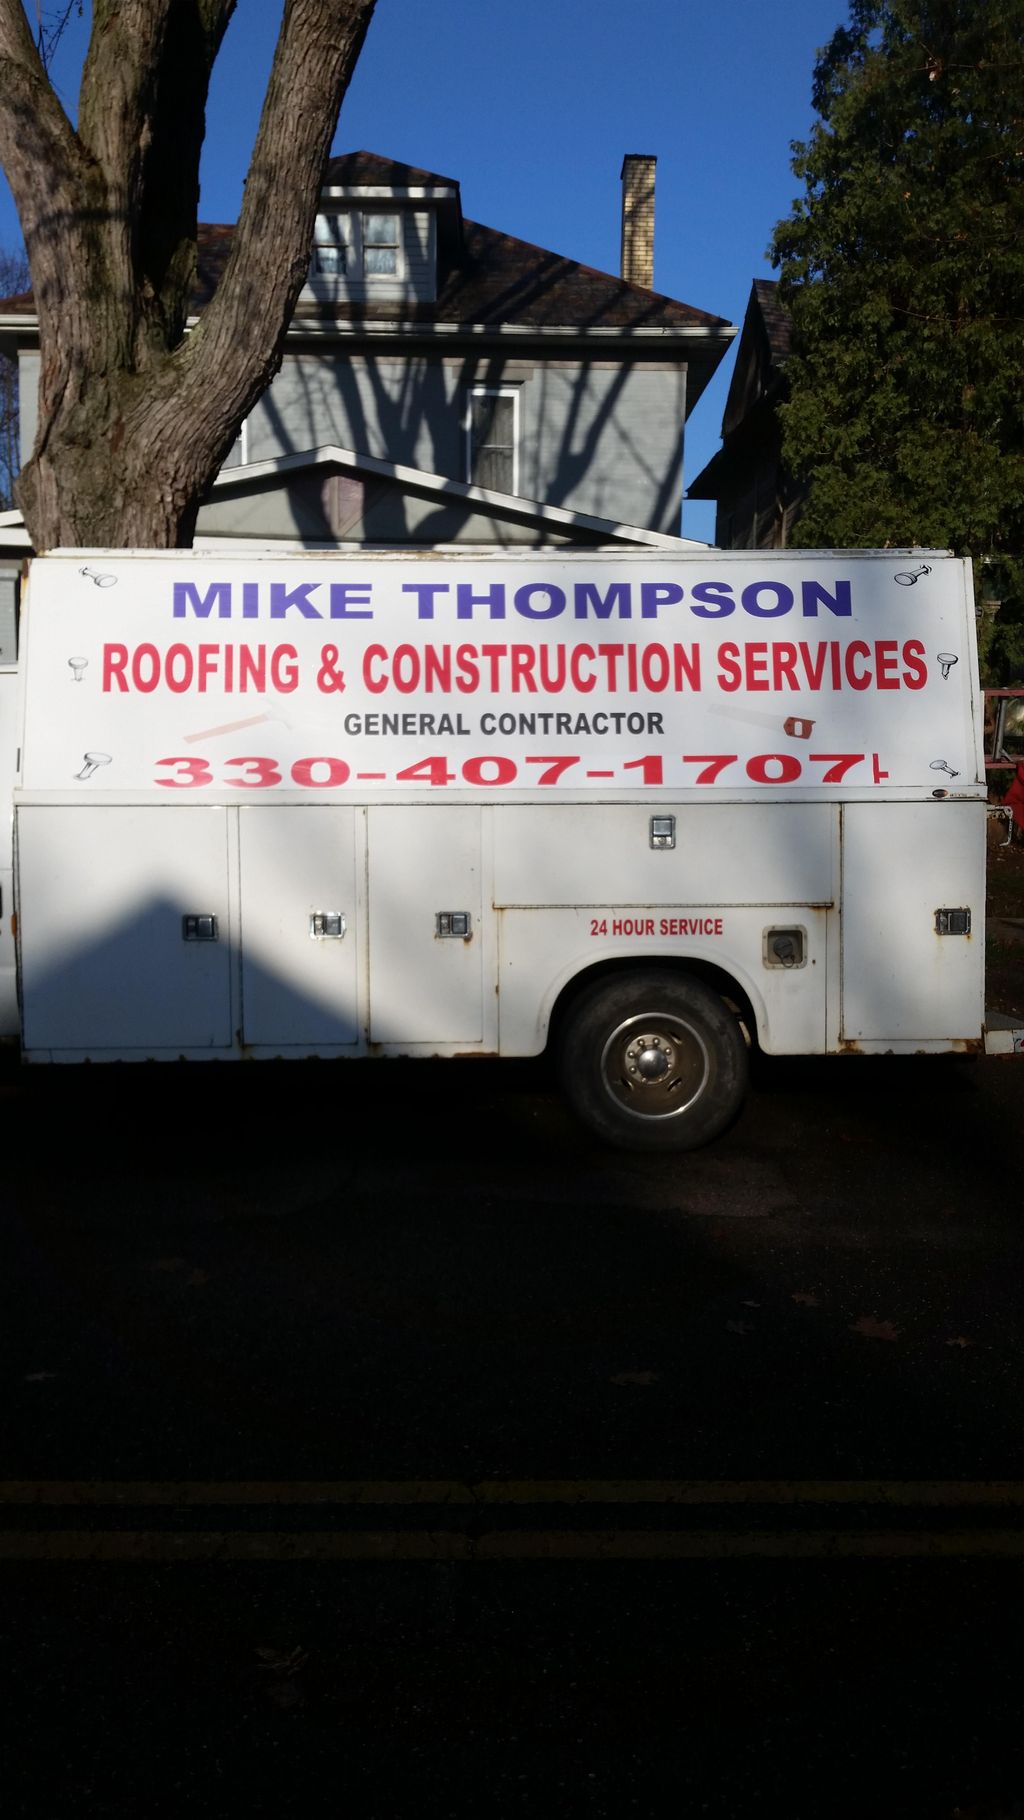 Mike Thompson Roofing and Construction services